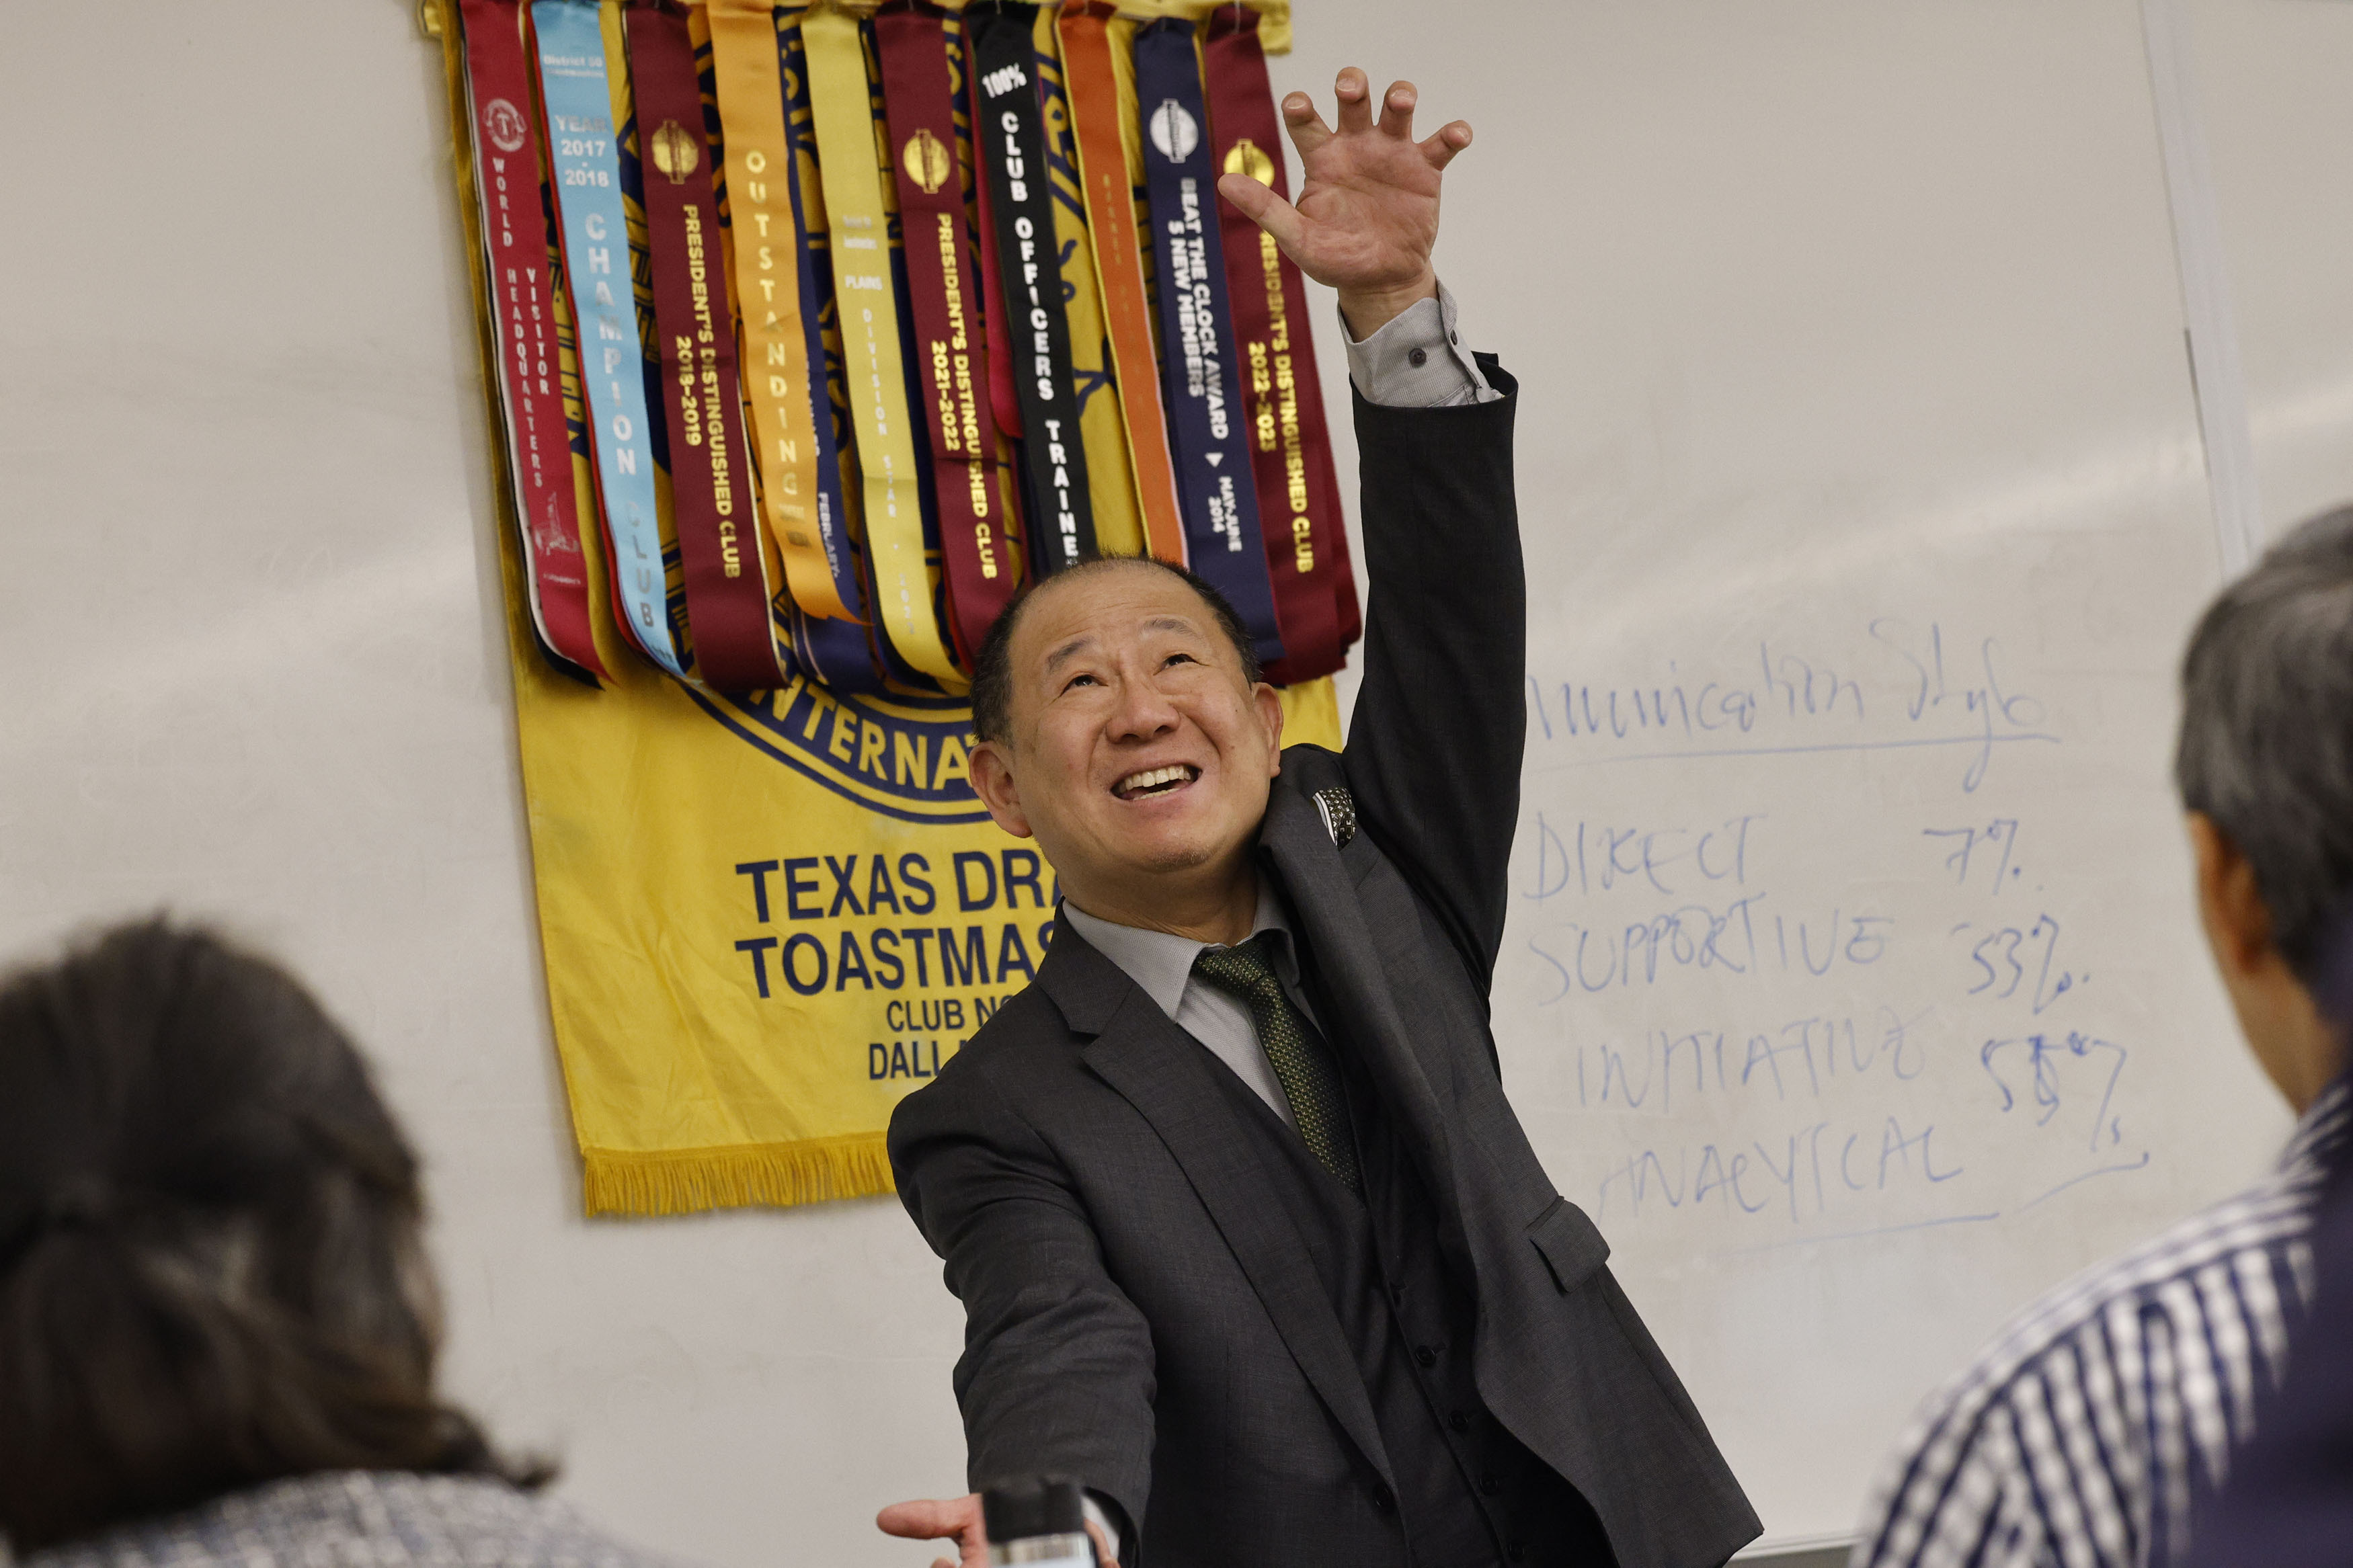 Yujun Liang delivers a speech during a Texas Dragon Toastmasters Club meeting at the...